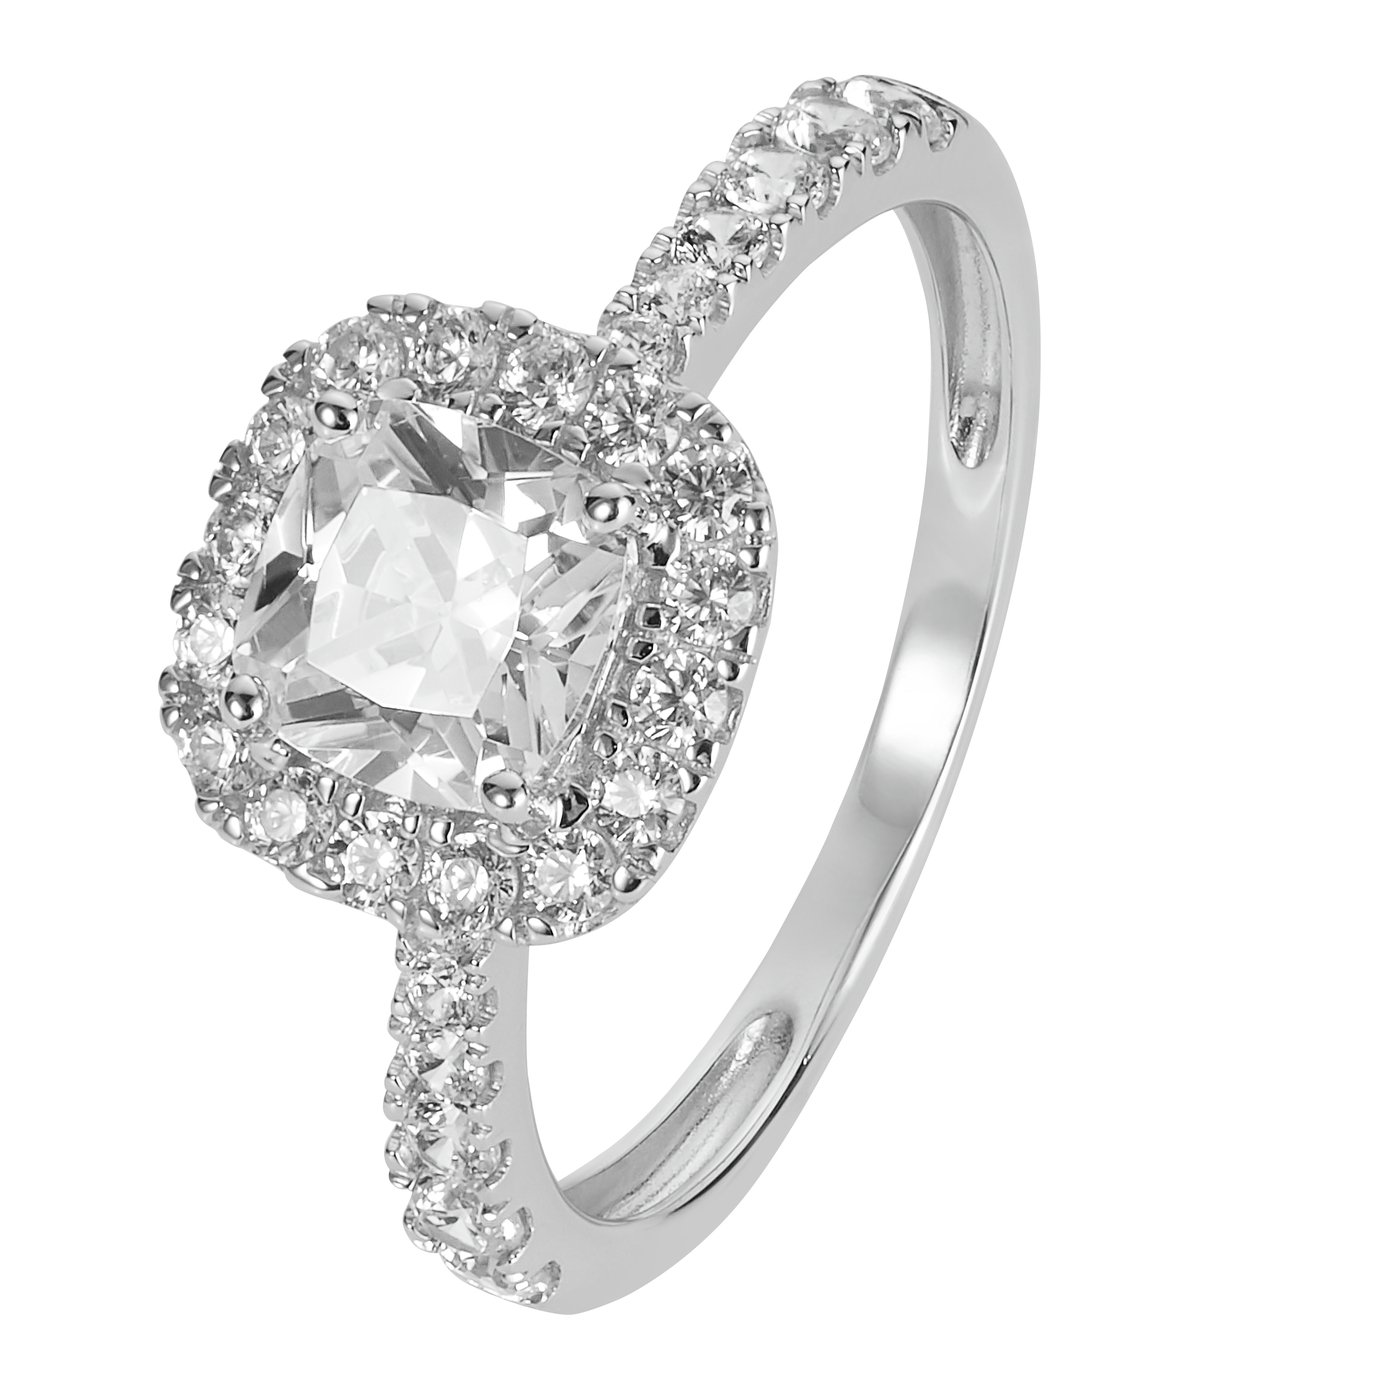 Revere 9ct White Gold Cubic Zirconia Halo Engagement Ring  N